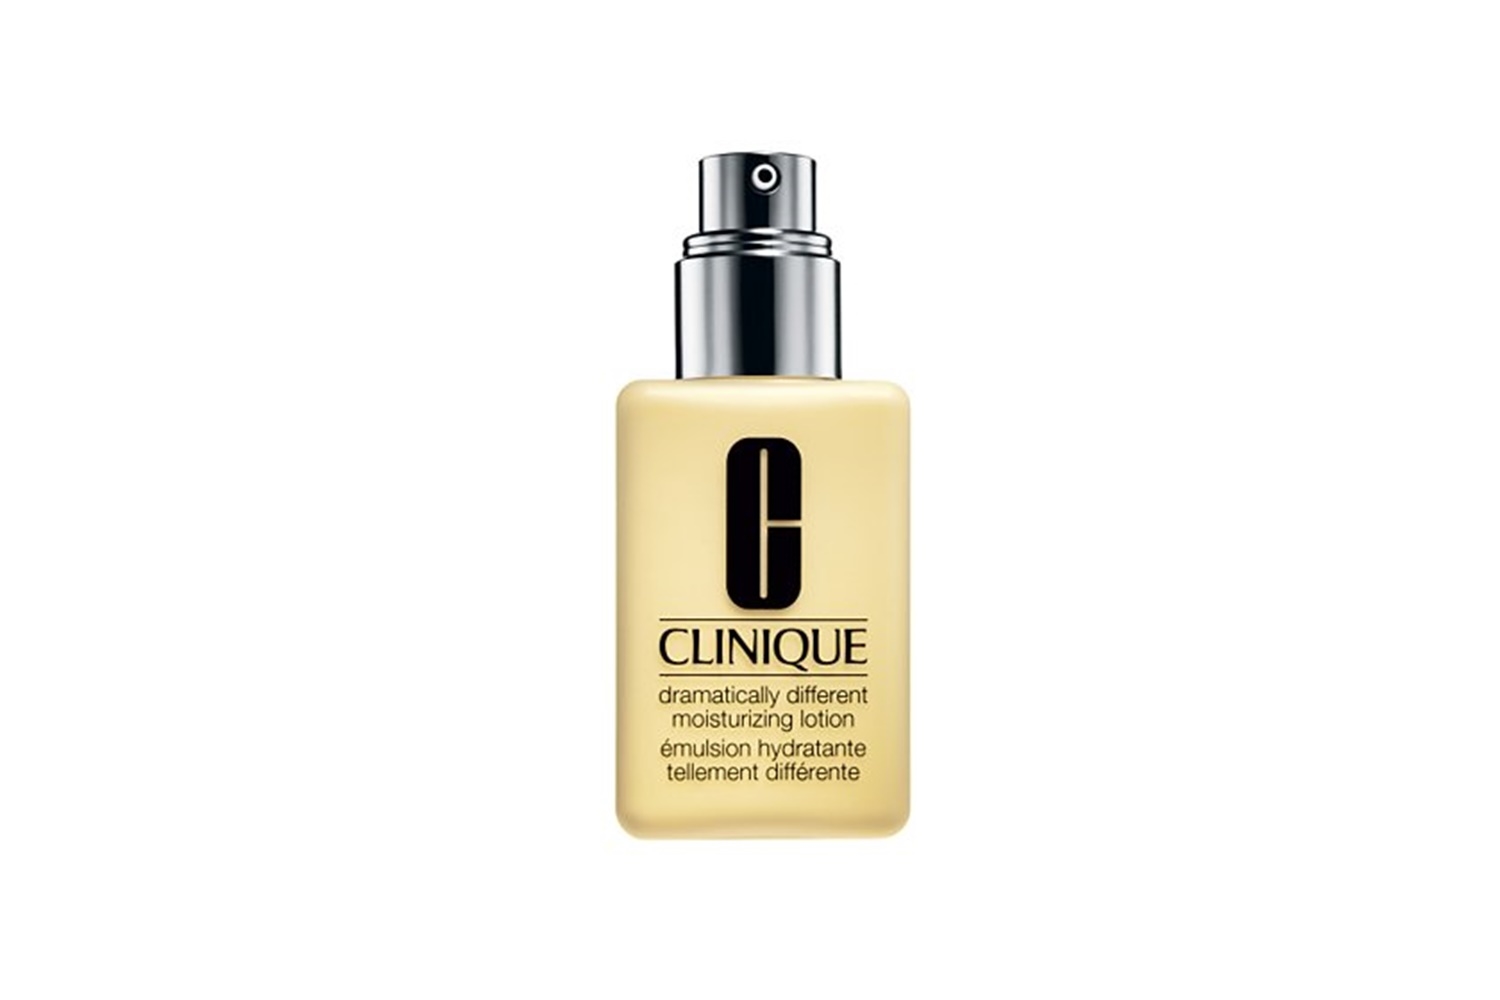 Clinique Dramatically Different Moisturizing Lotion 125 ml.